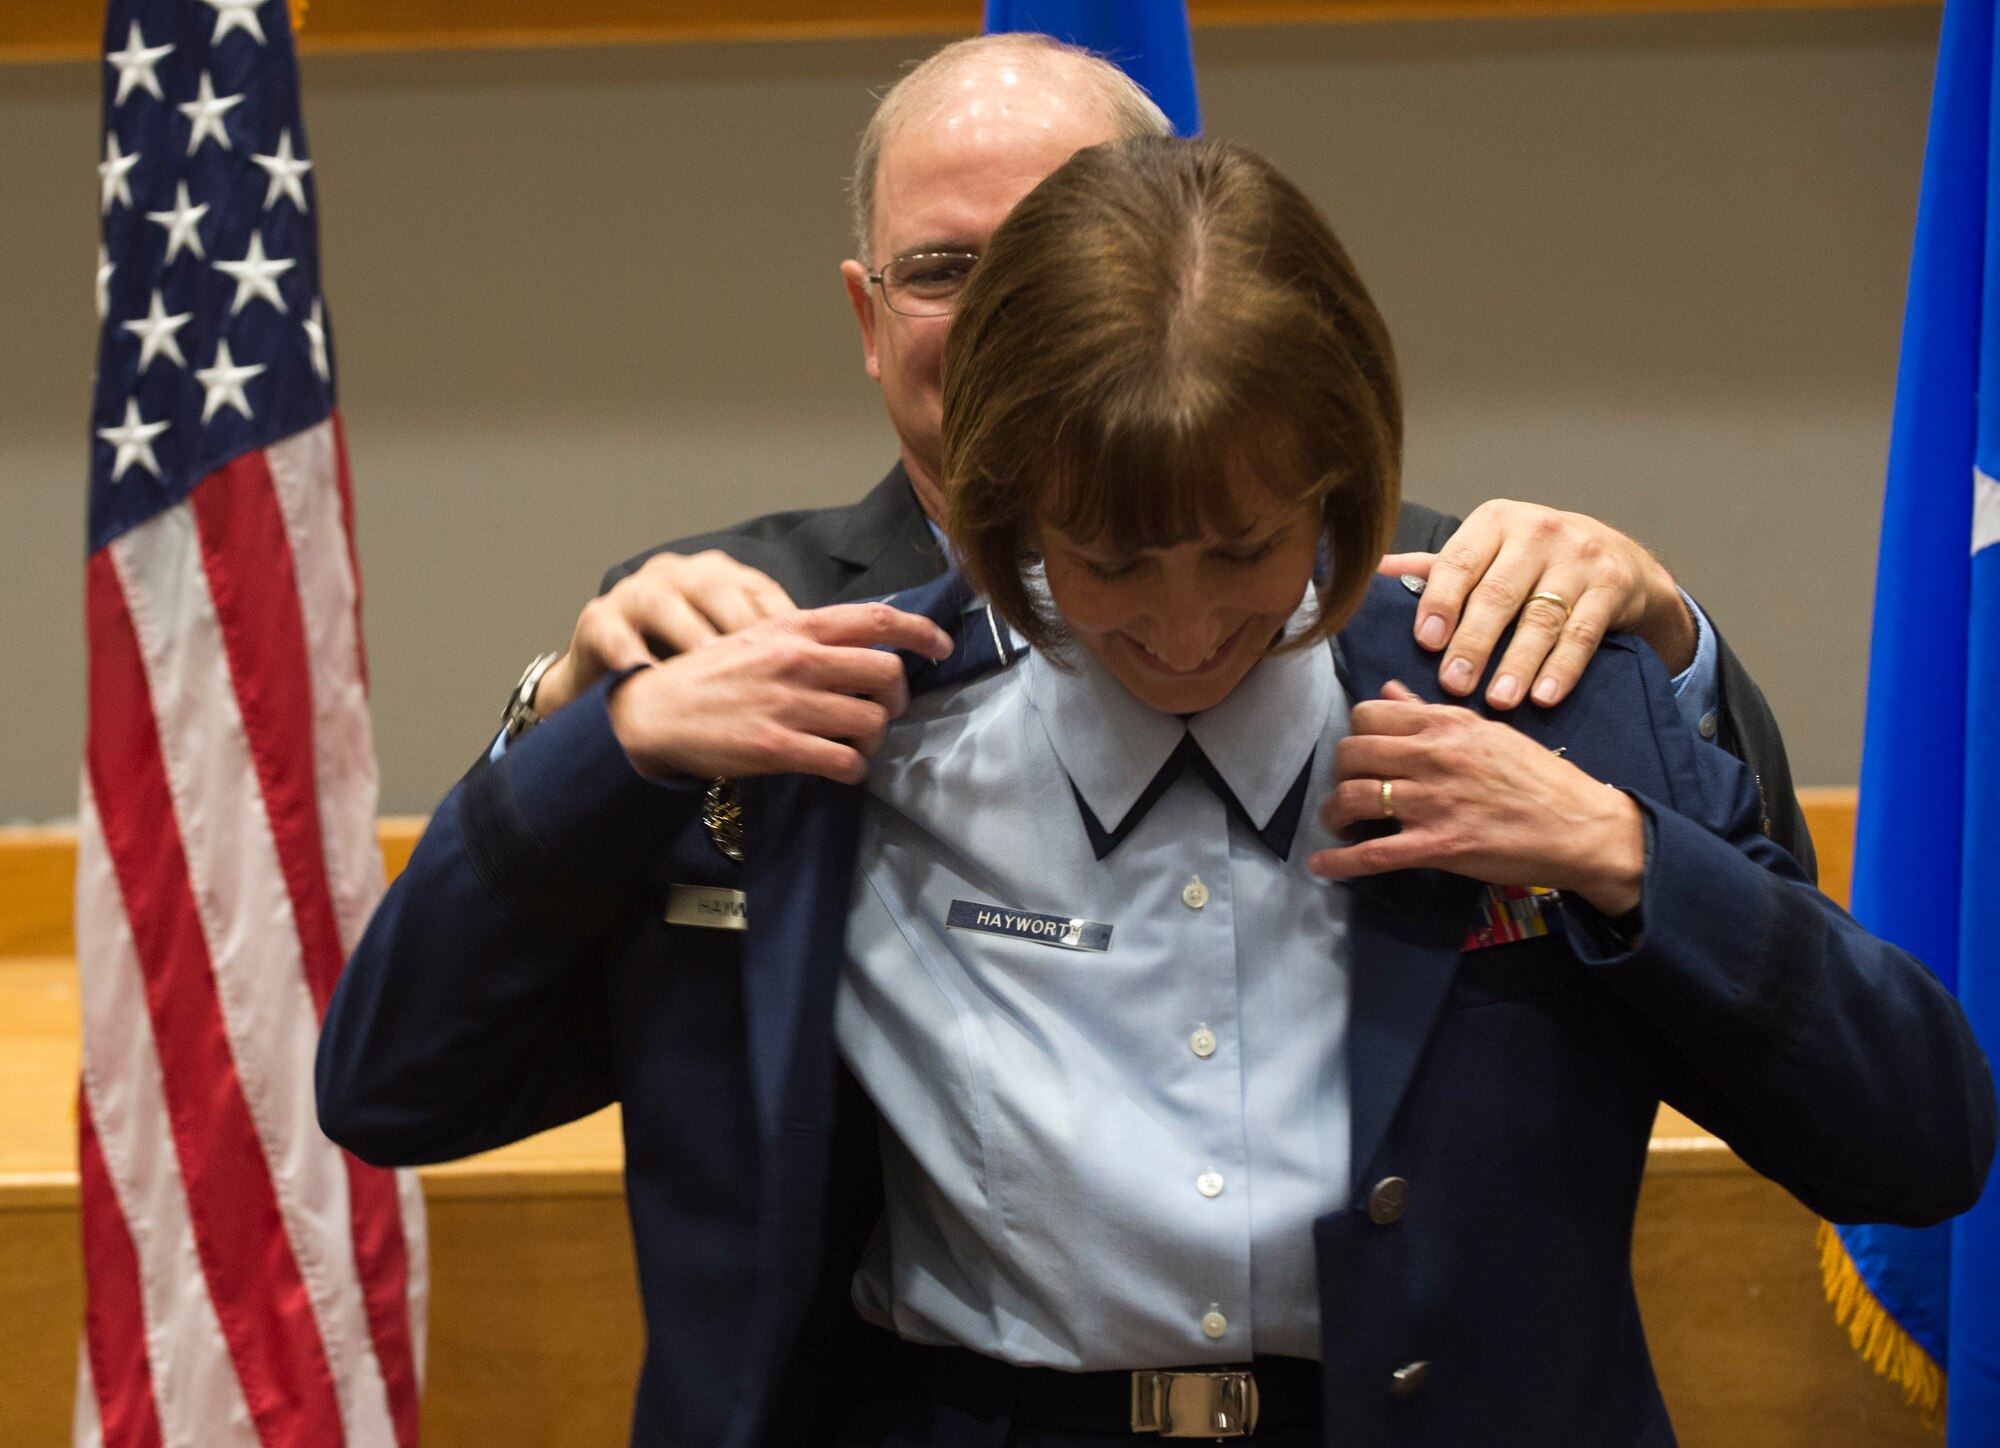 Stan Hayworth helps his wife, Brig. Gen. Michelle Hayworth, Air Forces Cyber vice commander, put on her service coat during her promotion ceremony at Joint Base San Antonio-Lackland, Texas, July, 16, 2018. In June, Michelle re-joined AFCYBER from Air Force Space Command. She previously served in AFCYBER, most recently as the 688th Cyberspace Wing Commander. (U.S. Air Force photo by Tech. Sgt. R.J. Biermann)